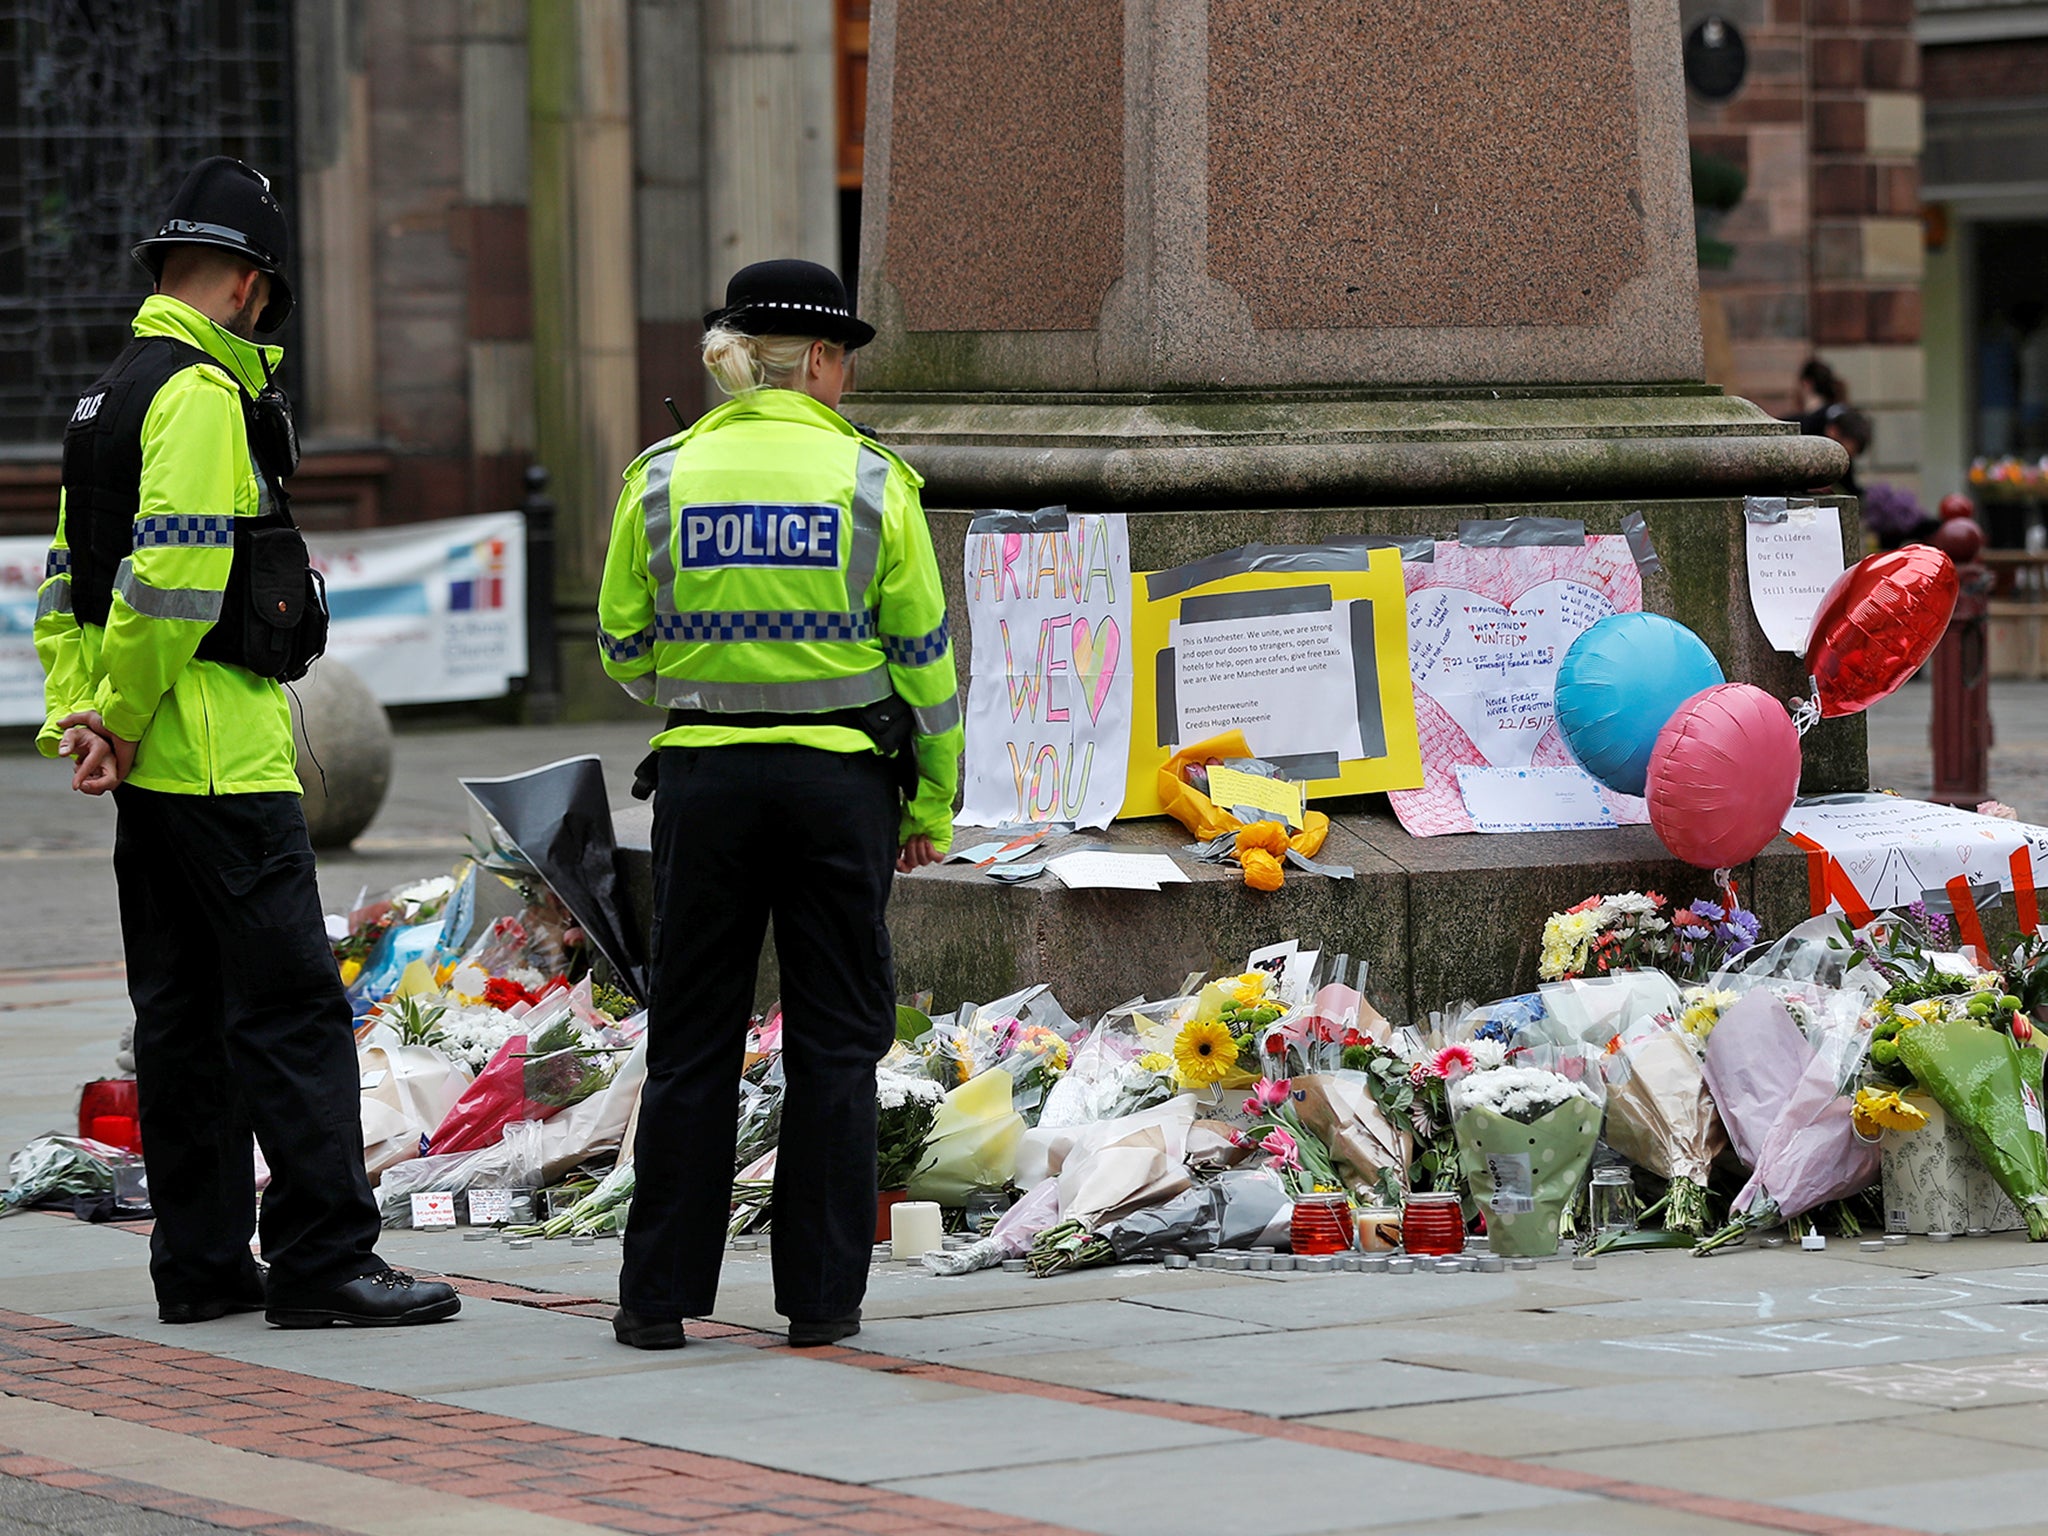 The deadliest attack to strike the UK in 2017 was the Manchester Arena bombing, which left 22 victims dead